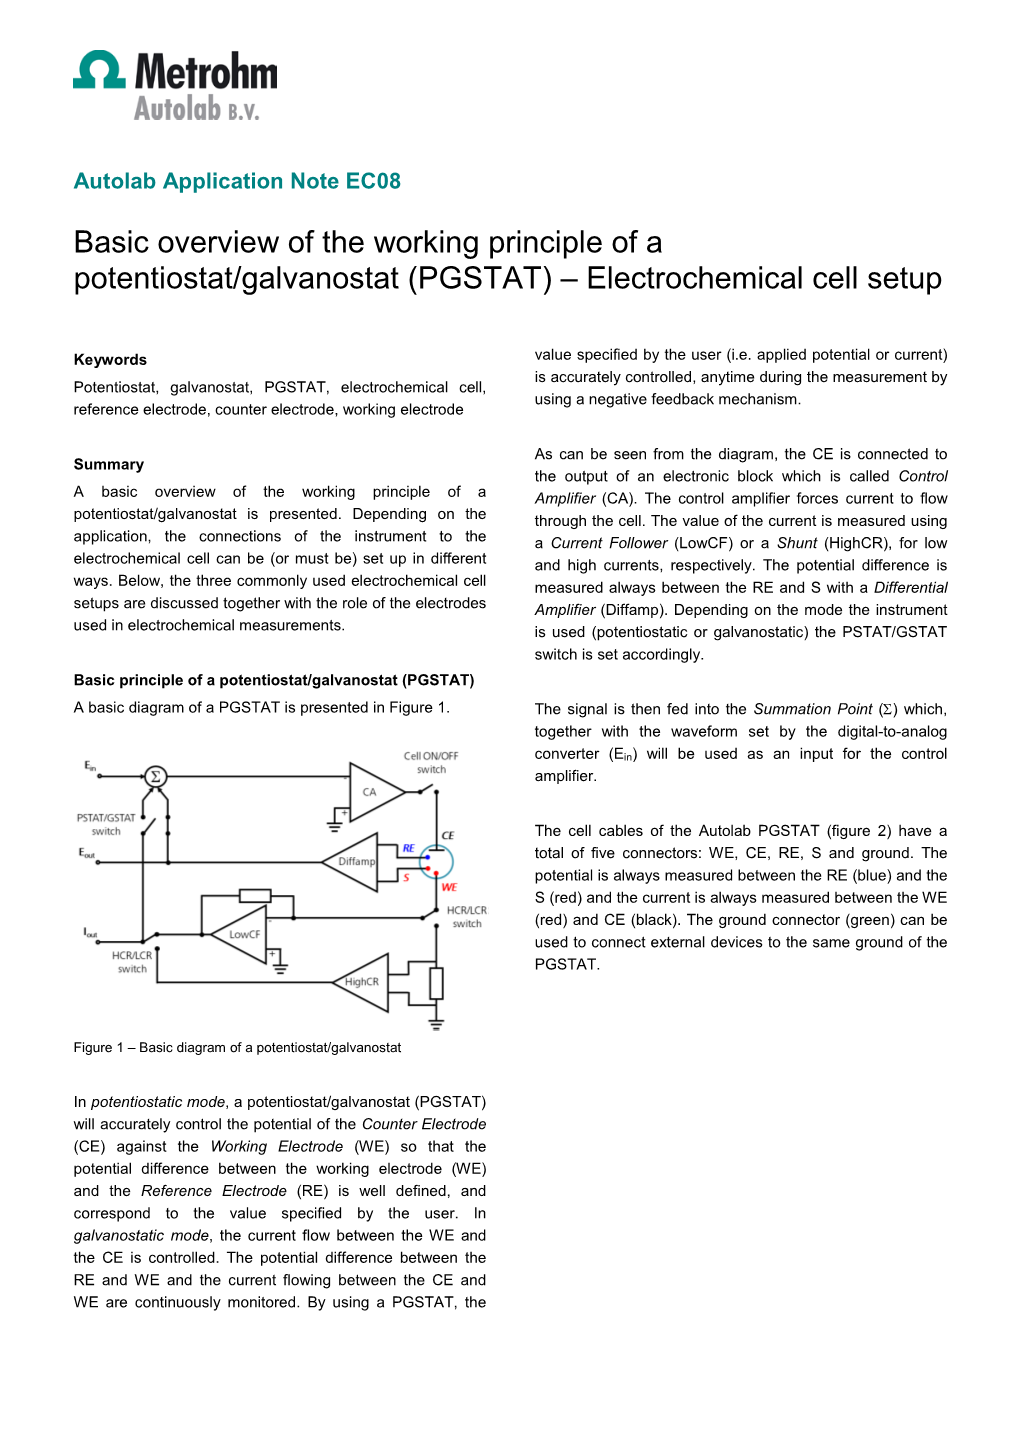 Basic Overview of the Working Principle of a Potentiostat/Galvanostat (PGSTAT) – Electrochemical Cell Setup